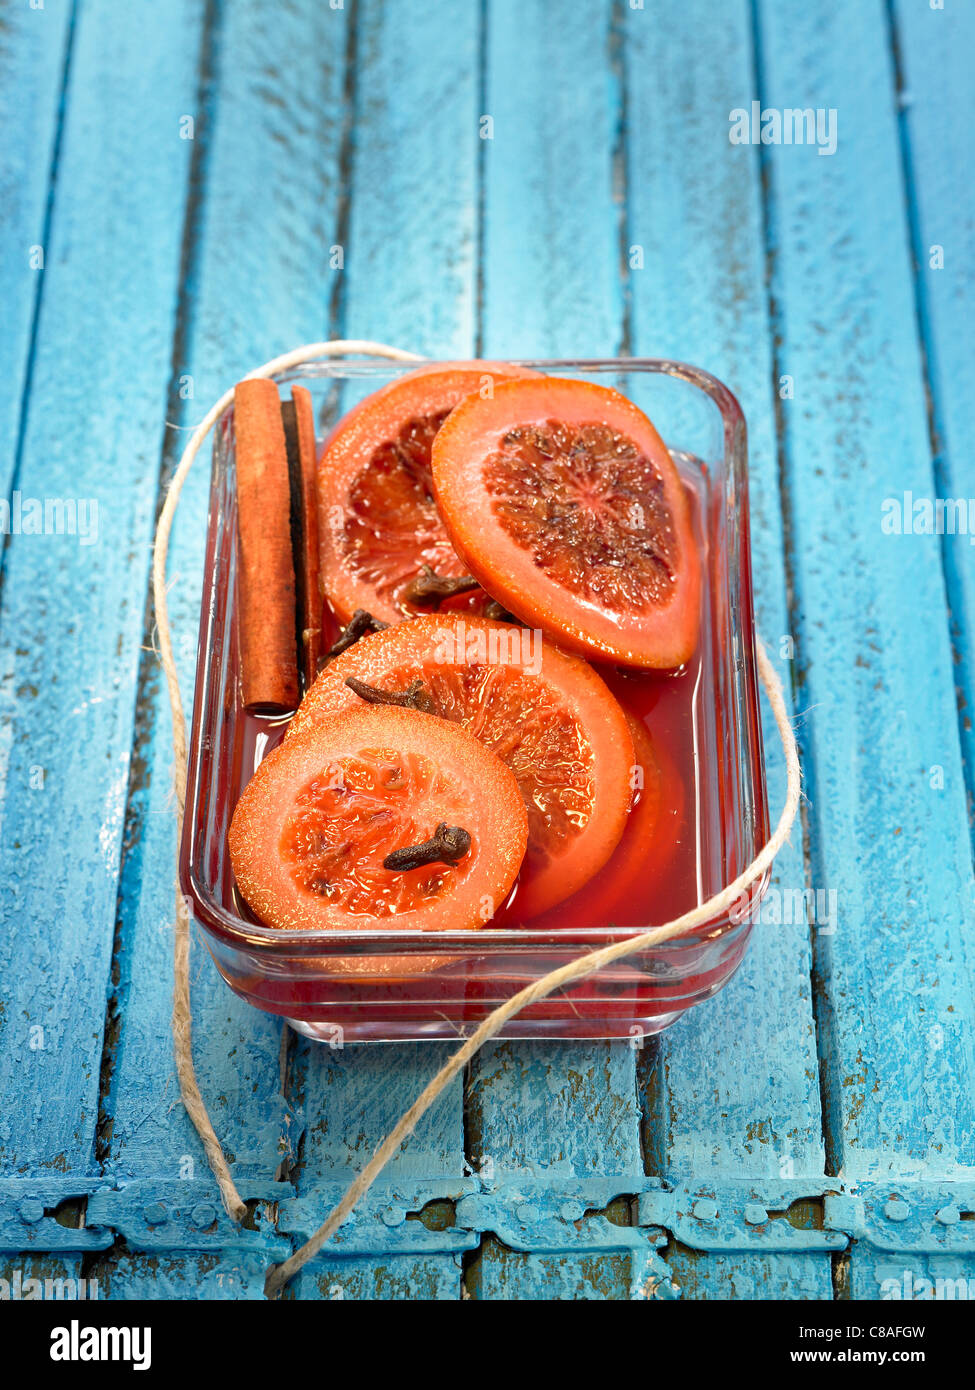 Sliced blood oranges with cloves and spices Stock Photo